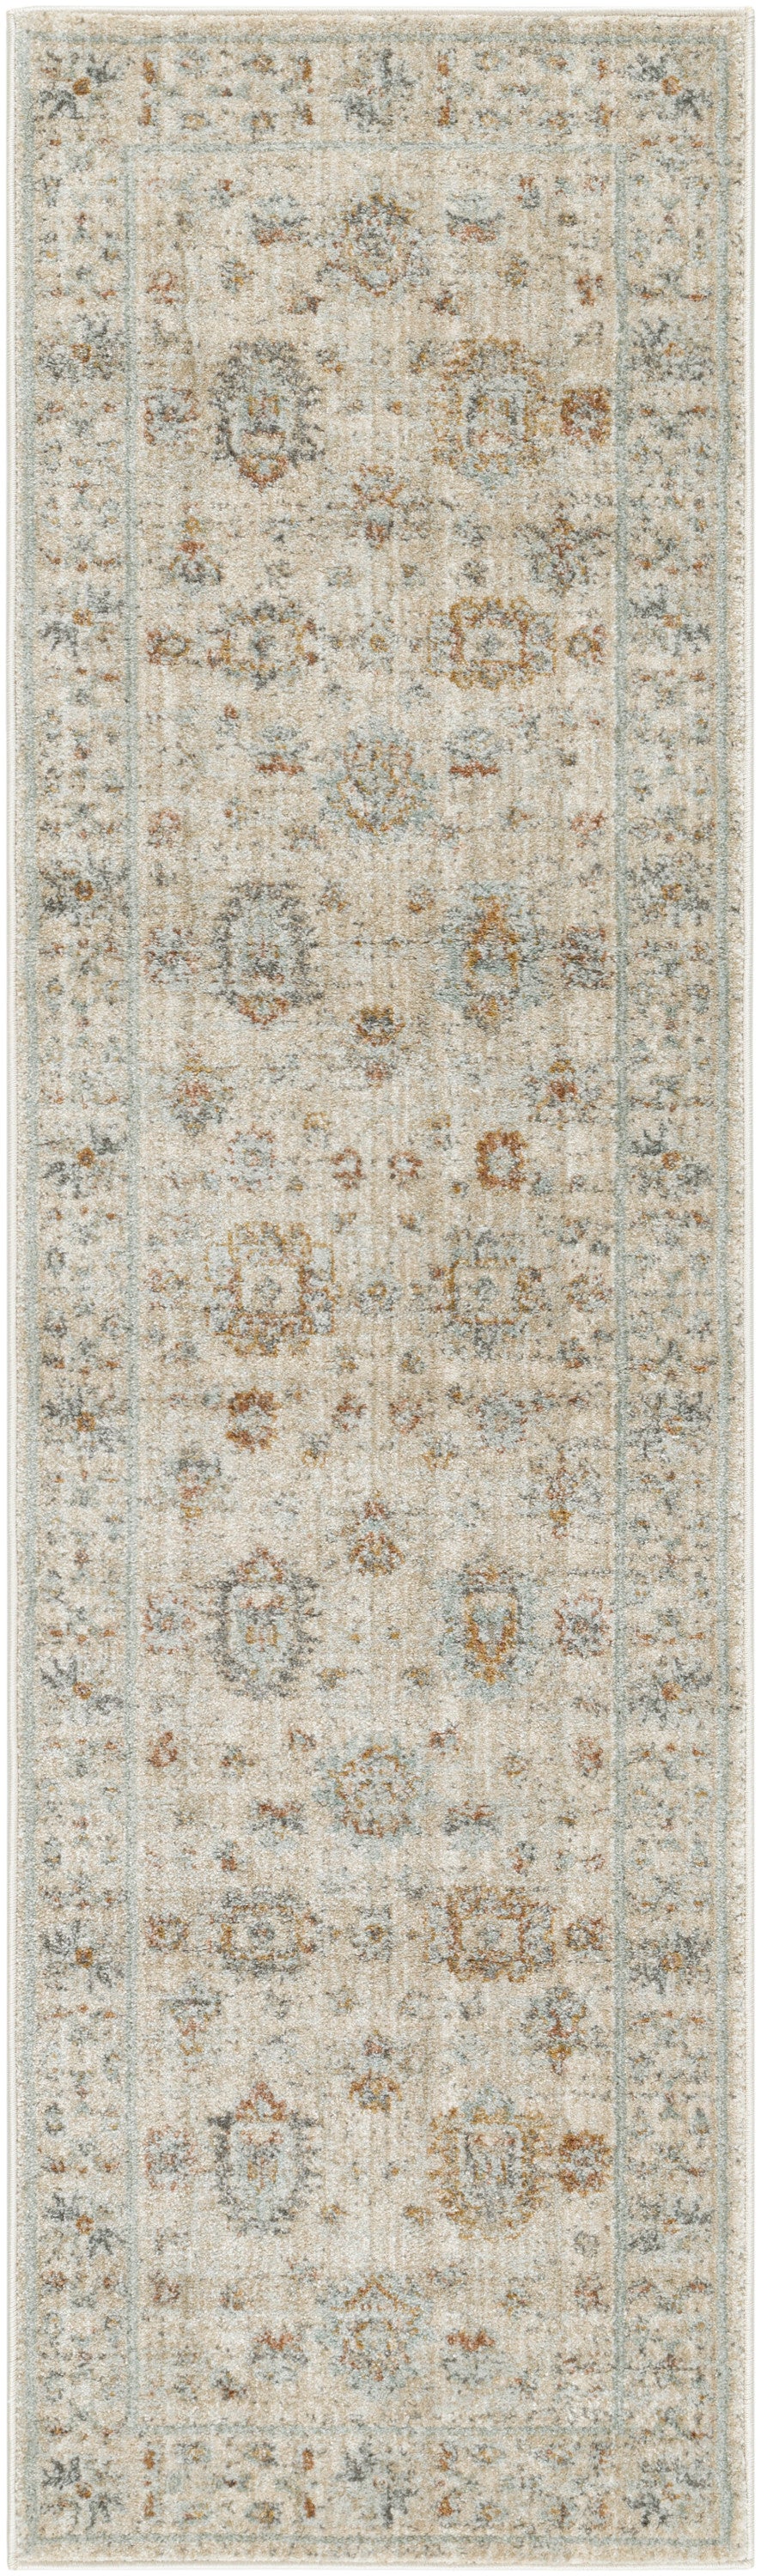 Nourison Home Oases OAE01 Ivory Beige Traditional Machinemade Rug